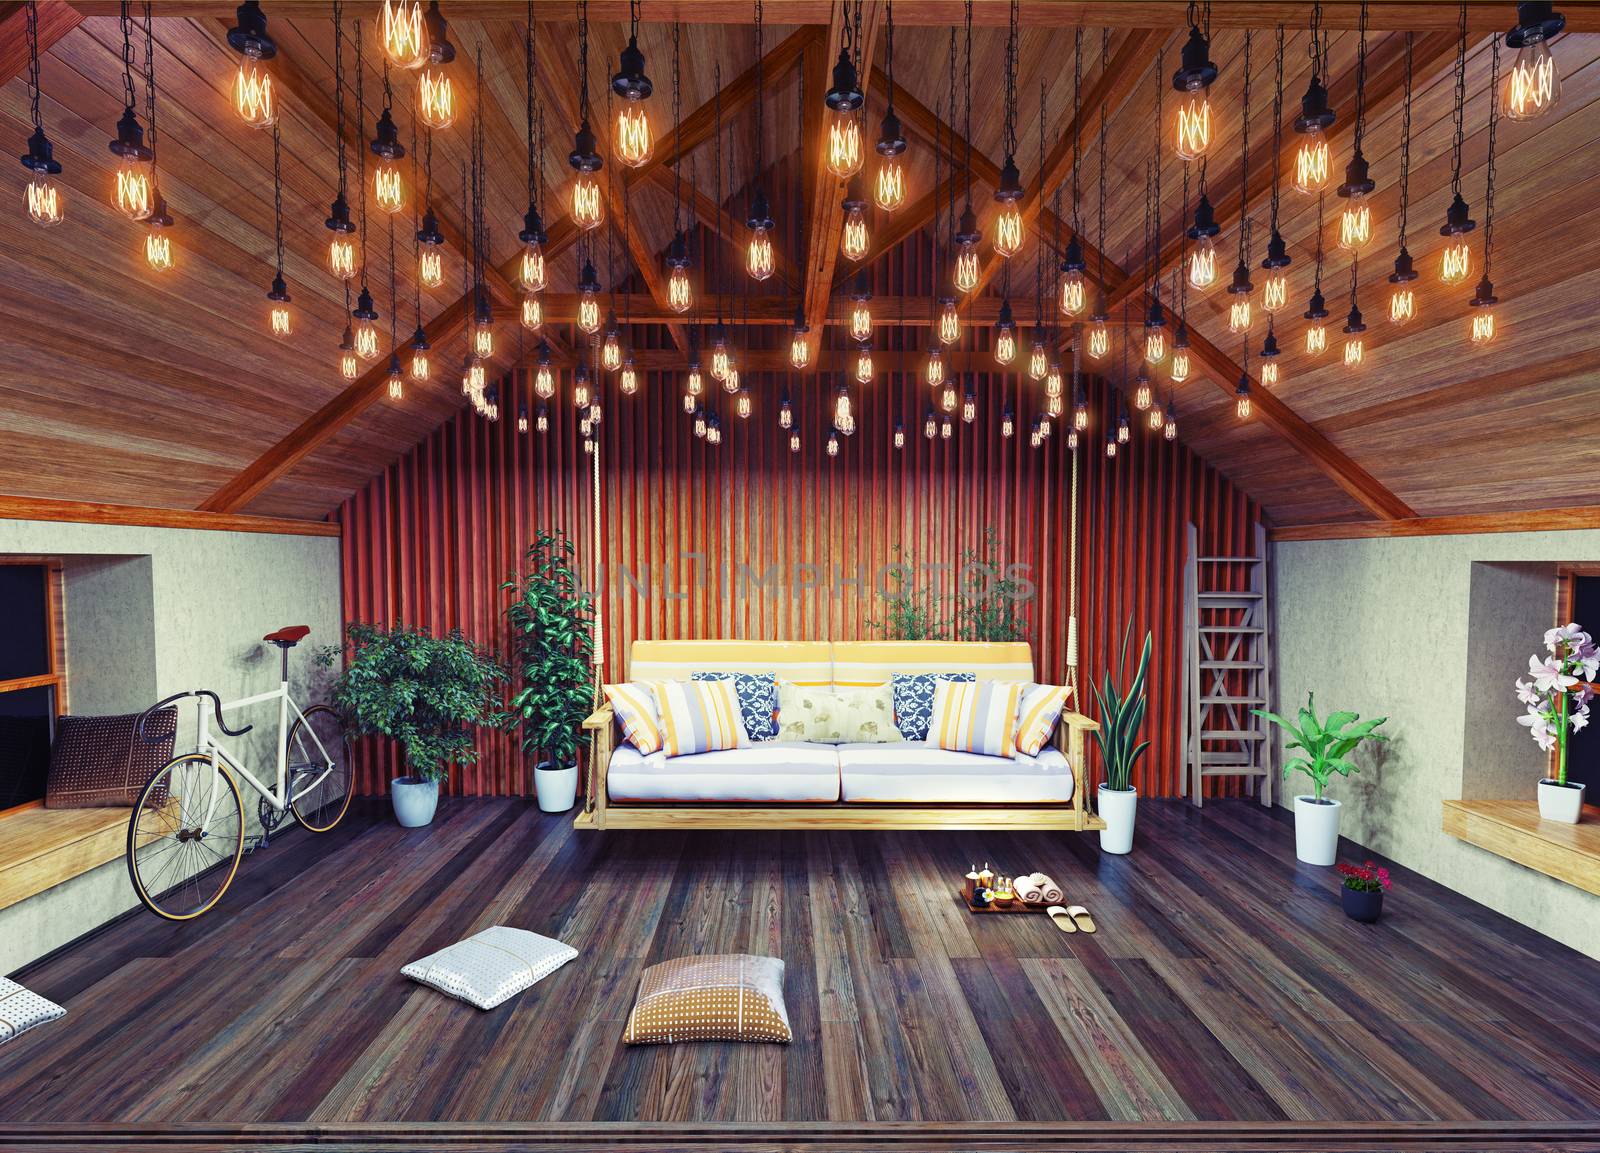 hanging sofa in the attic interior, decorated  with vintage lamps. 3D design concept